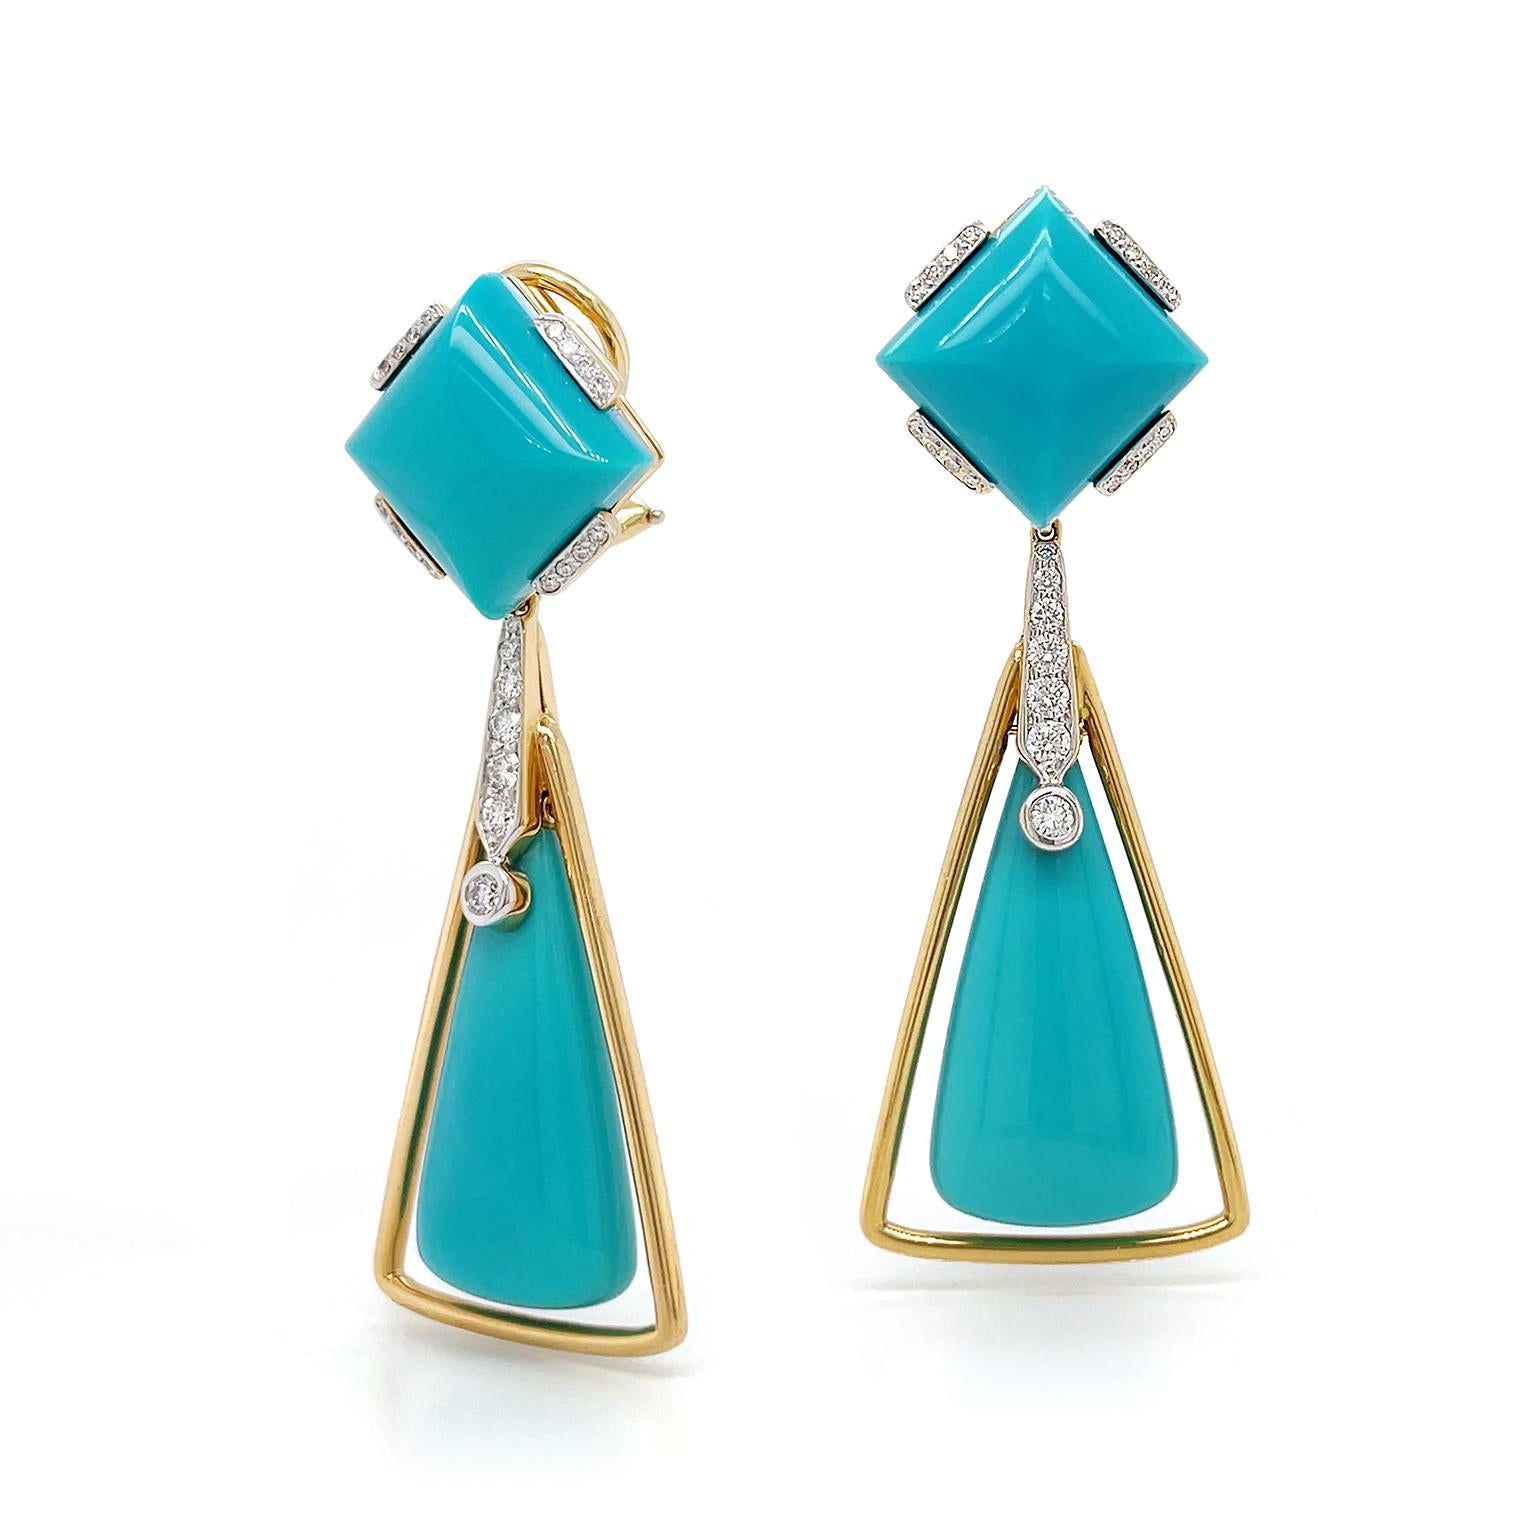 An arresting blue hue of turquoise is showcased in these drop earrings. Beginning with a square cabochon, slender 18k yellow gold prongs ornamented with diamonds emit a soft flicker. Next a tapered row of diamonds, ascending in size, draws the eye